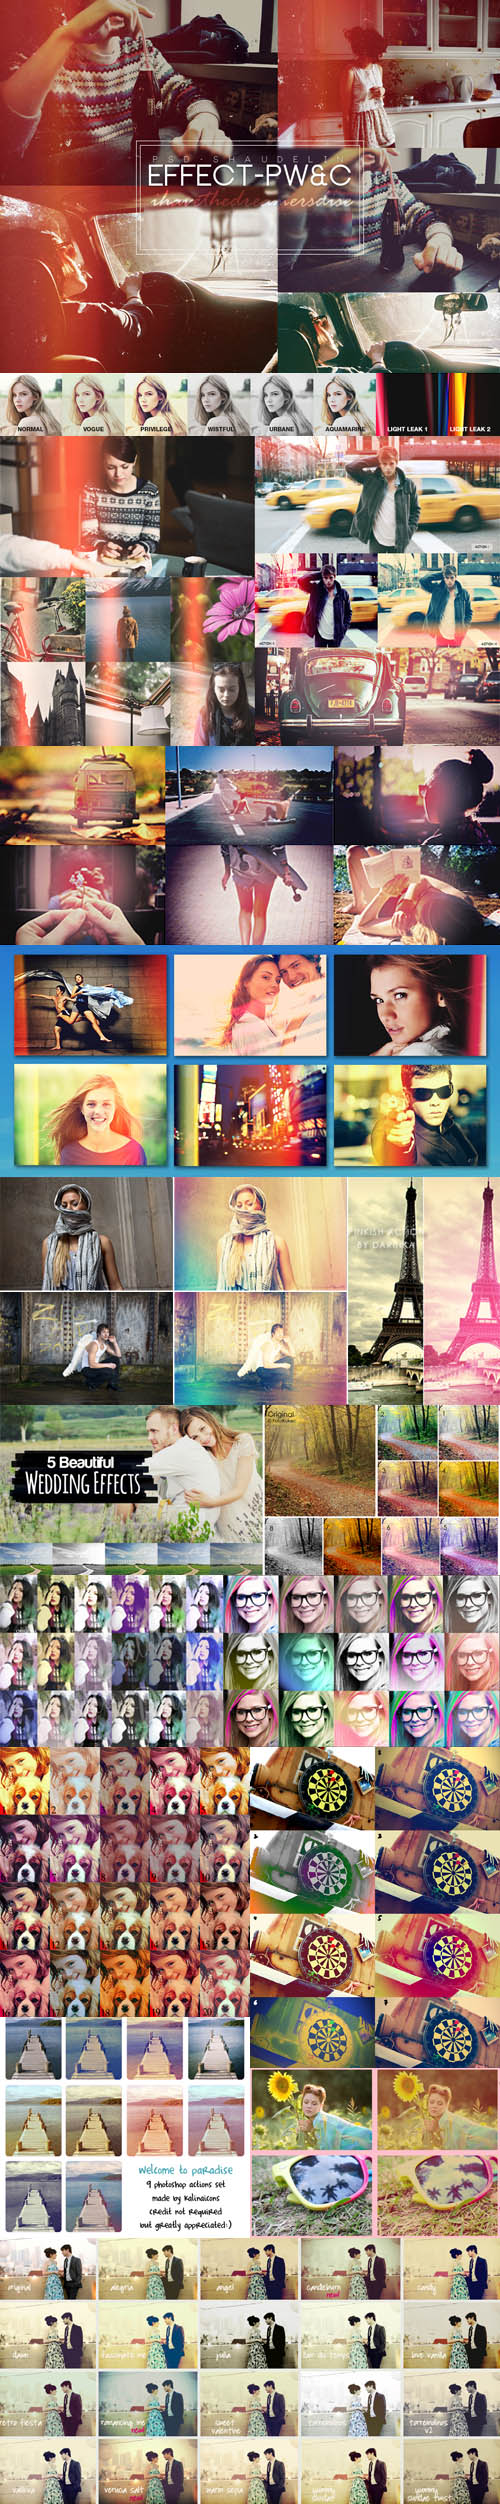 Light Leaks & Retro Effects Photoshop Actions (16 ATN)